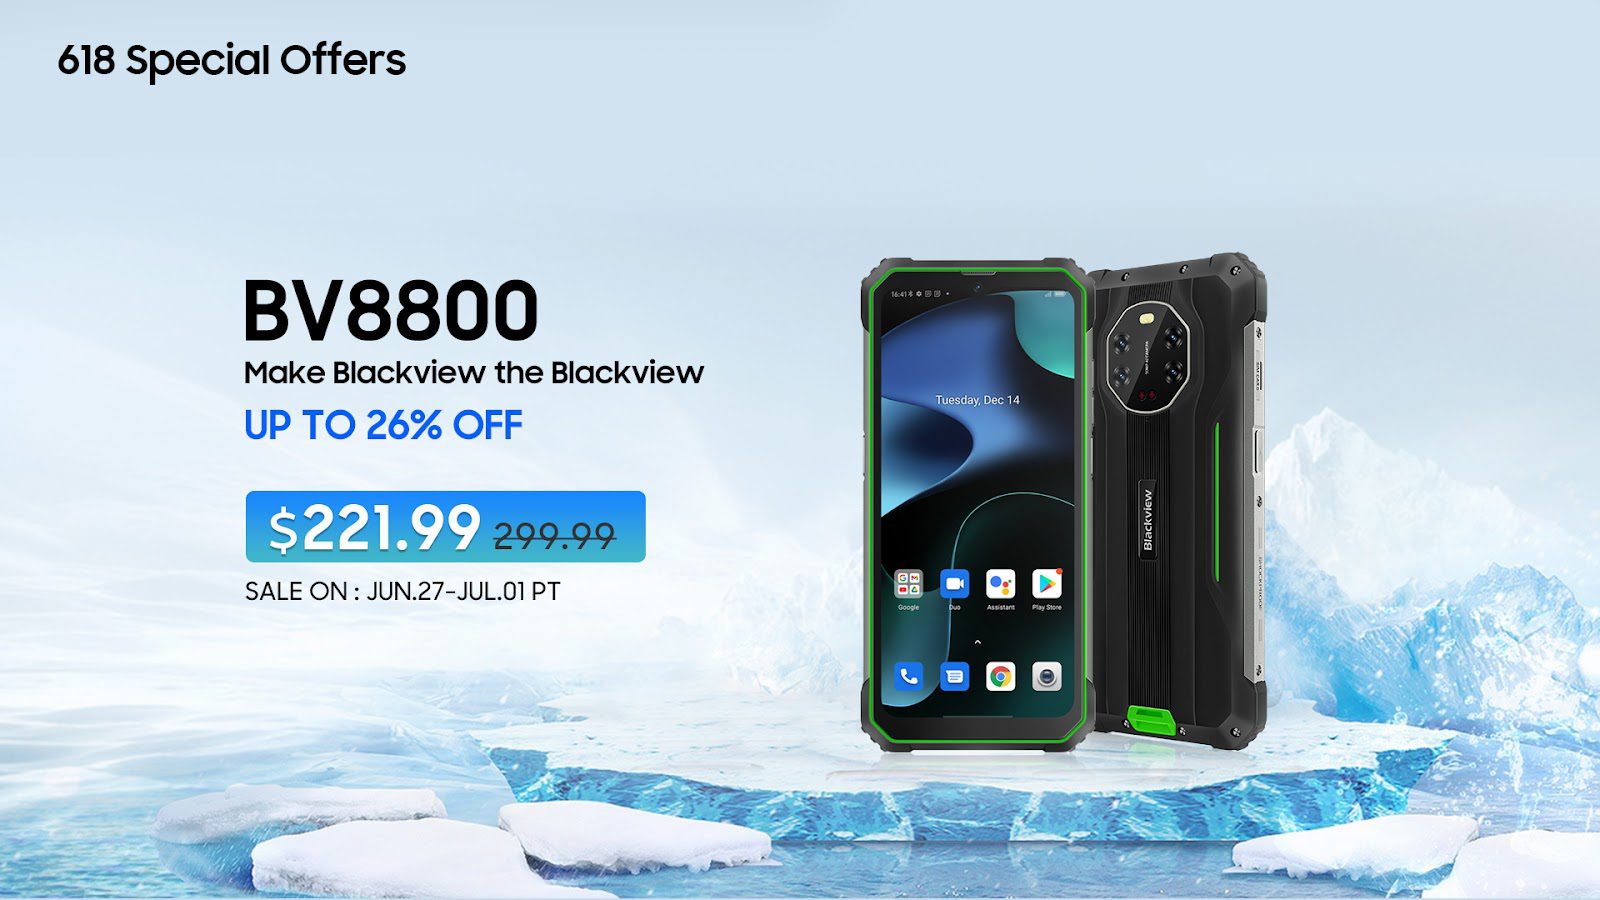 Blackview Aliexpress 618 Summer Sale 2022 Goes Live with Massive Discounts up to $264 off